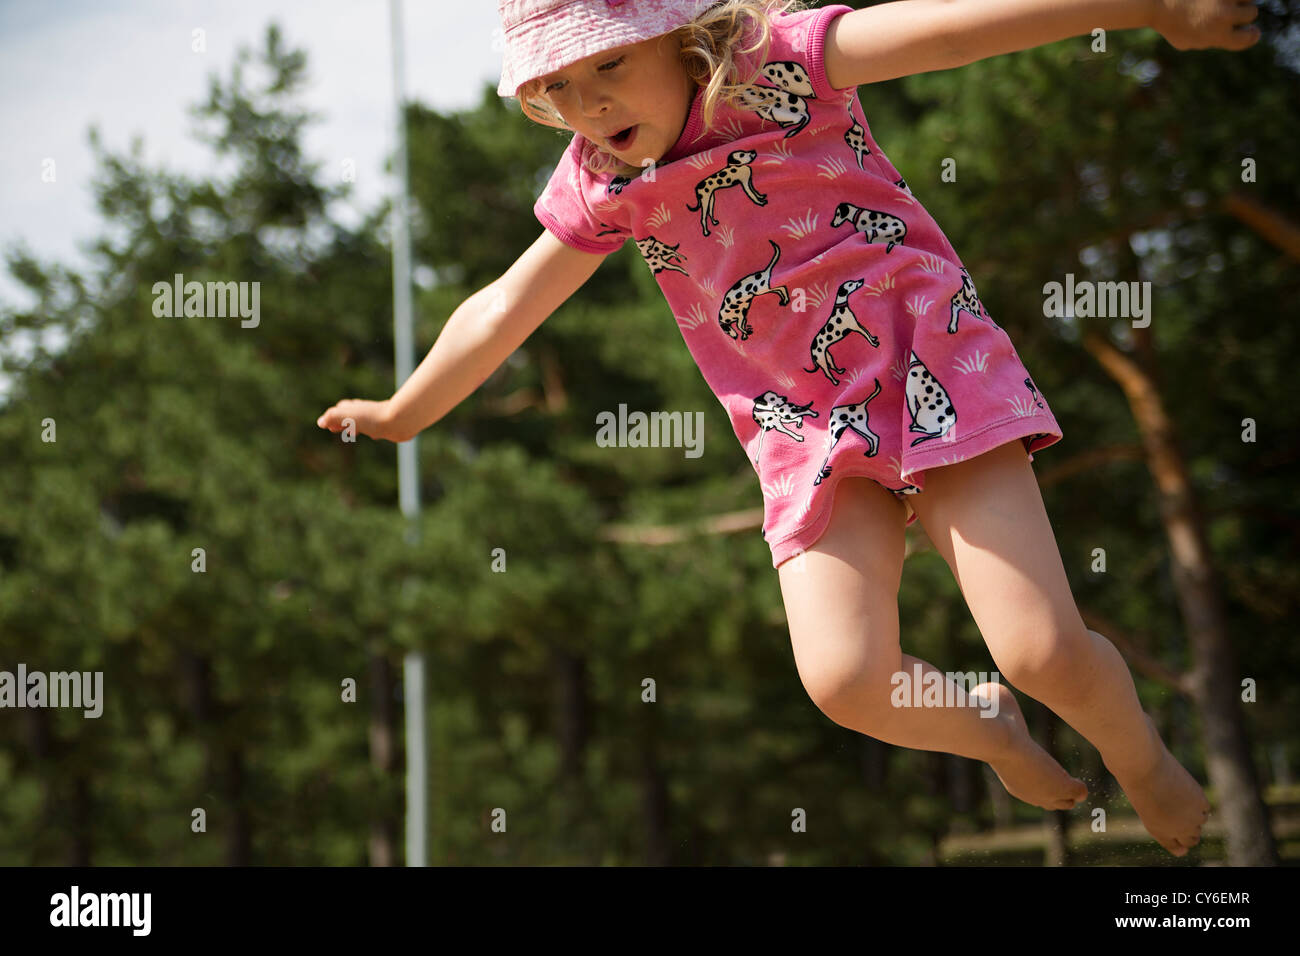 Cute girl is captured on camera while jumping Stock Photo